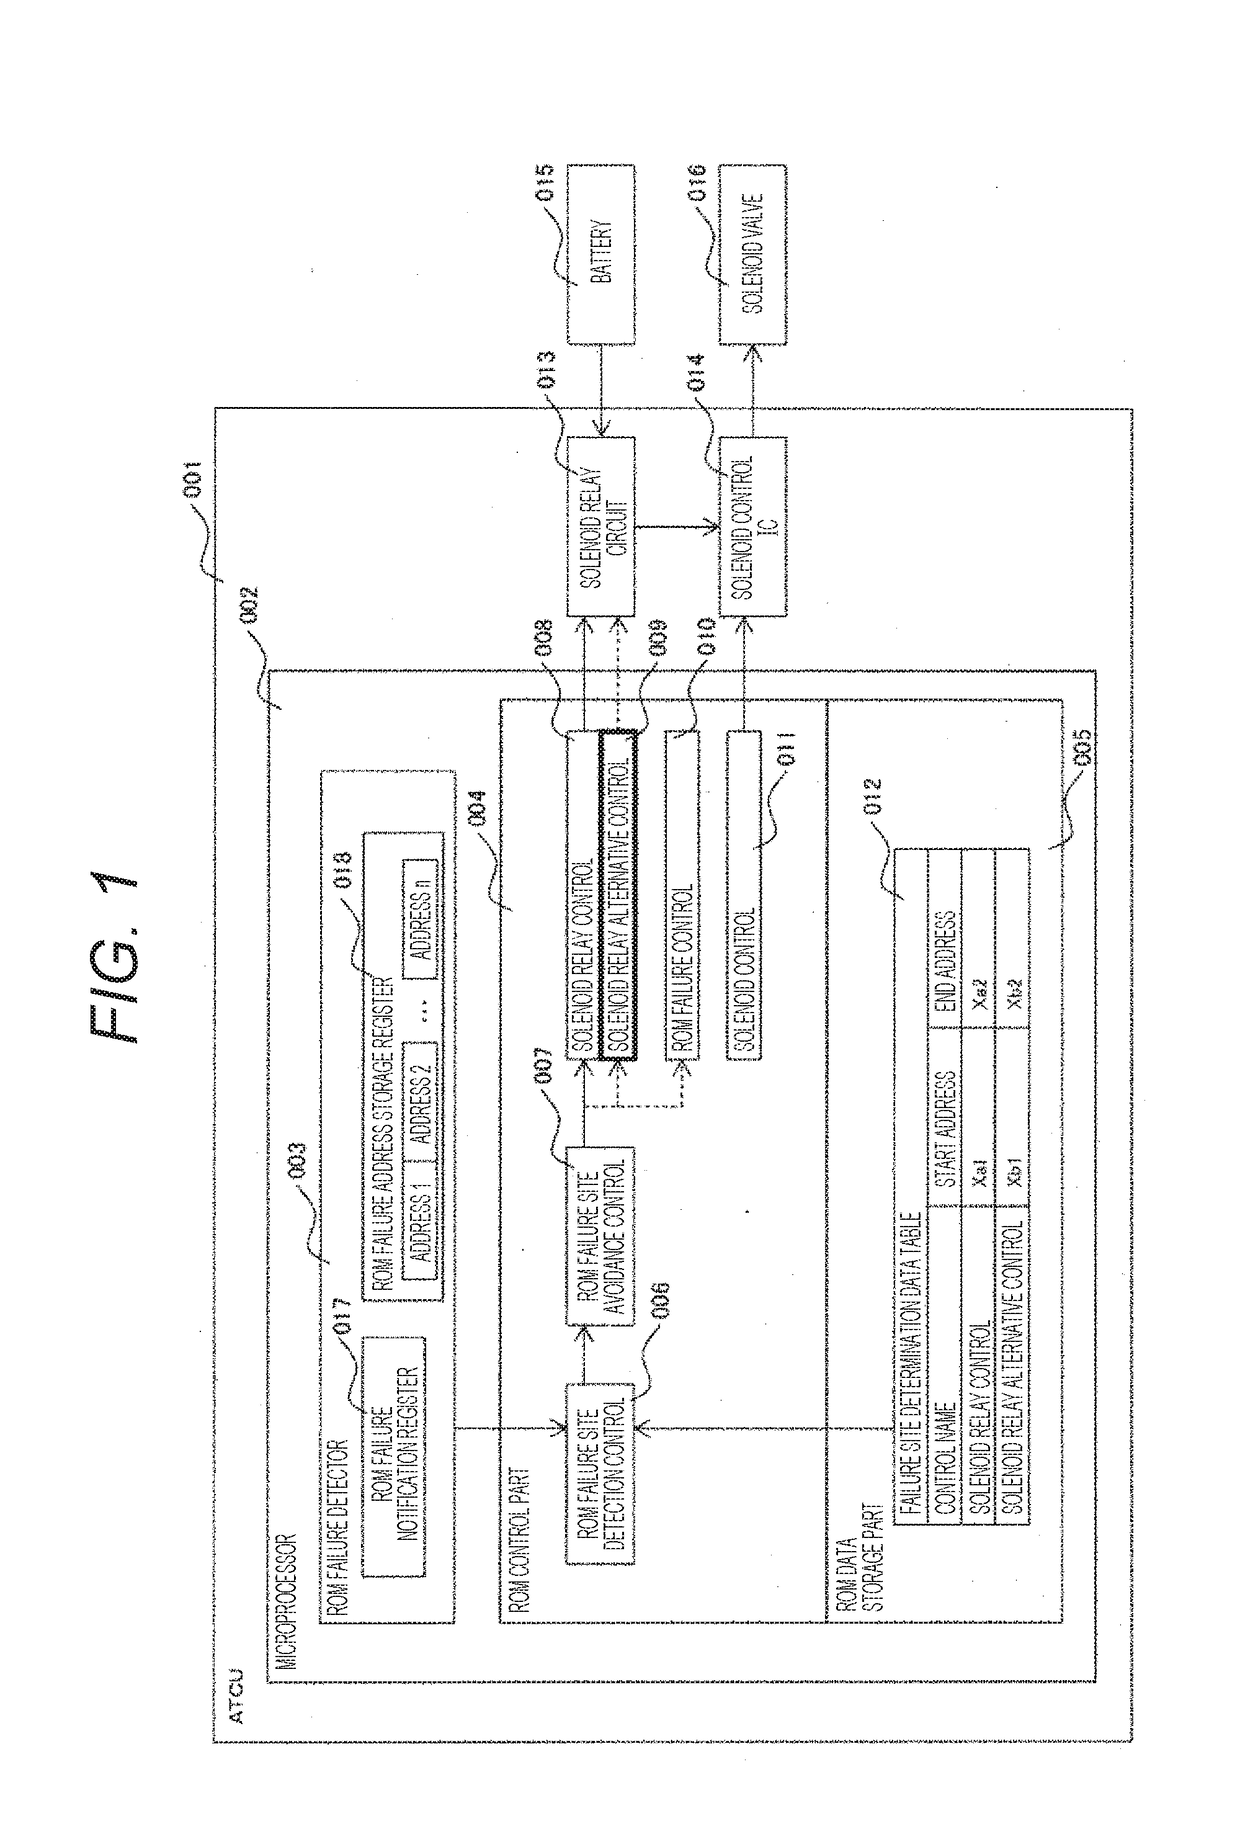 Controller for Vehicle Transmission